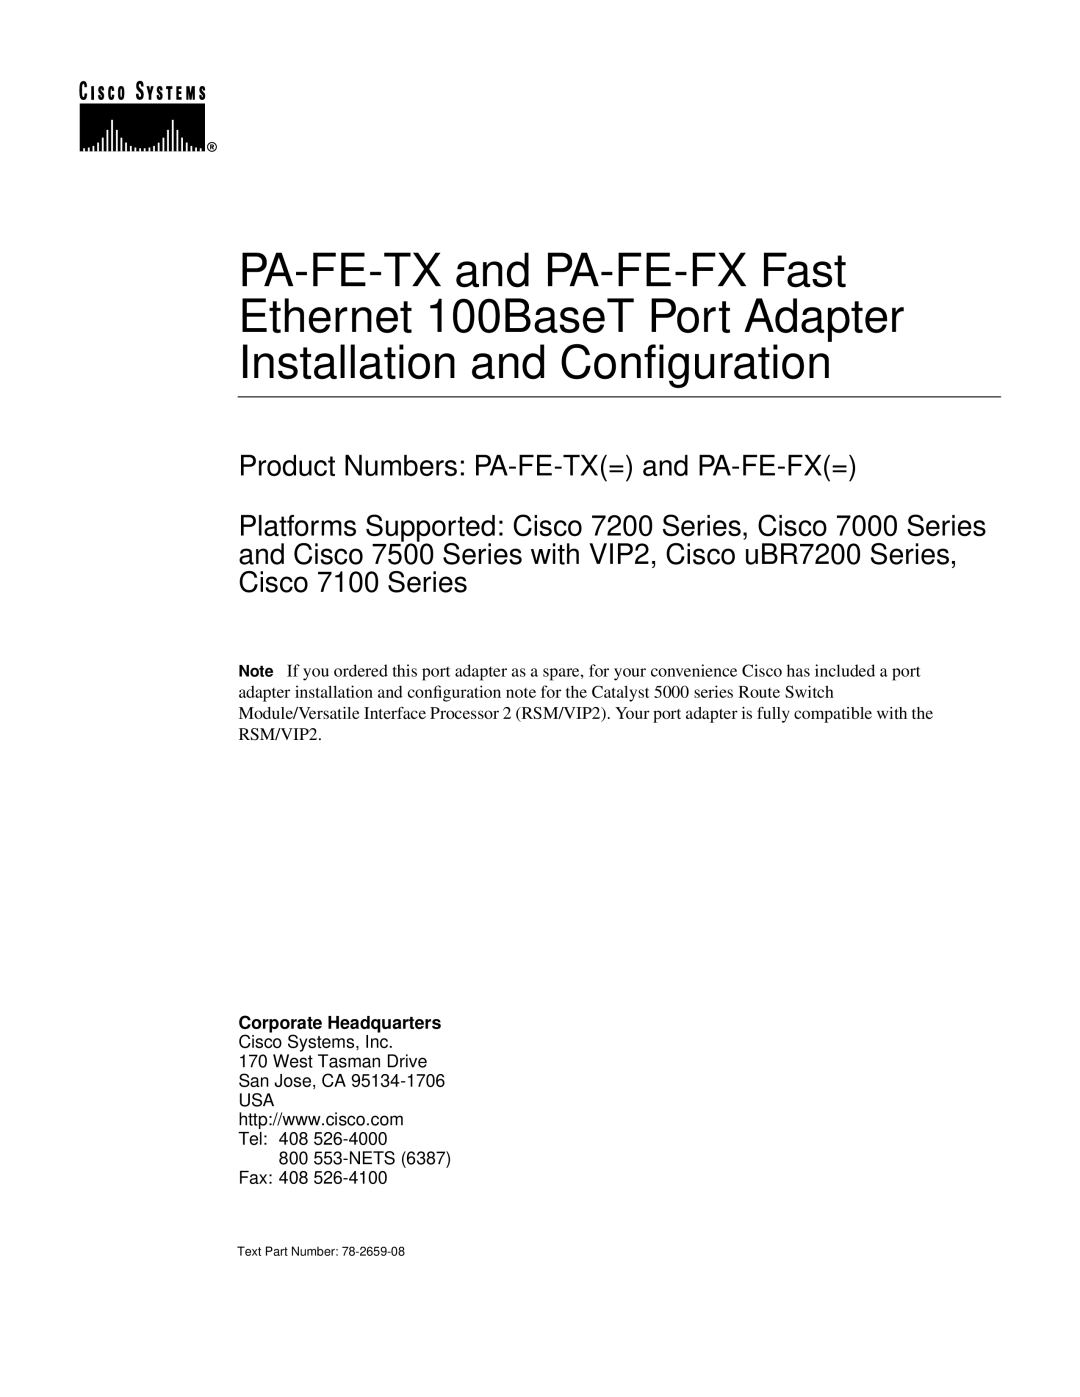 Cisco Systems manual Product Numbers PA-FE-TX= and PA-FE-FX=, Corporate Headquarters 